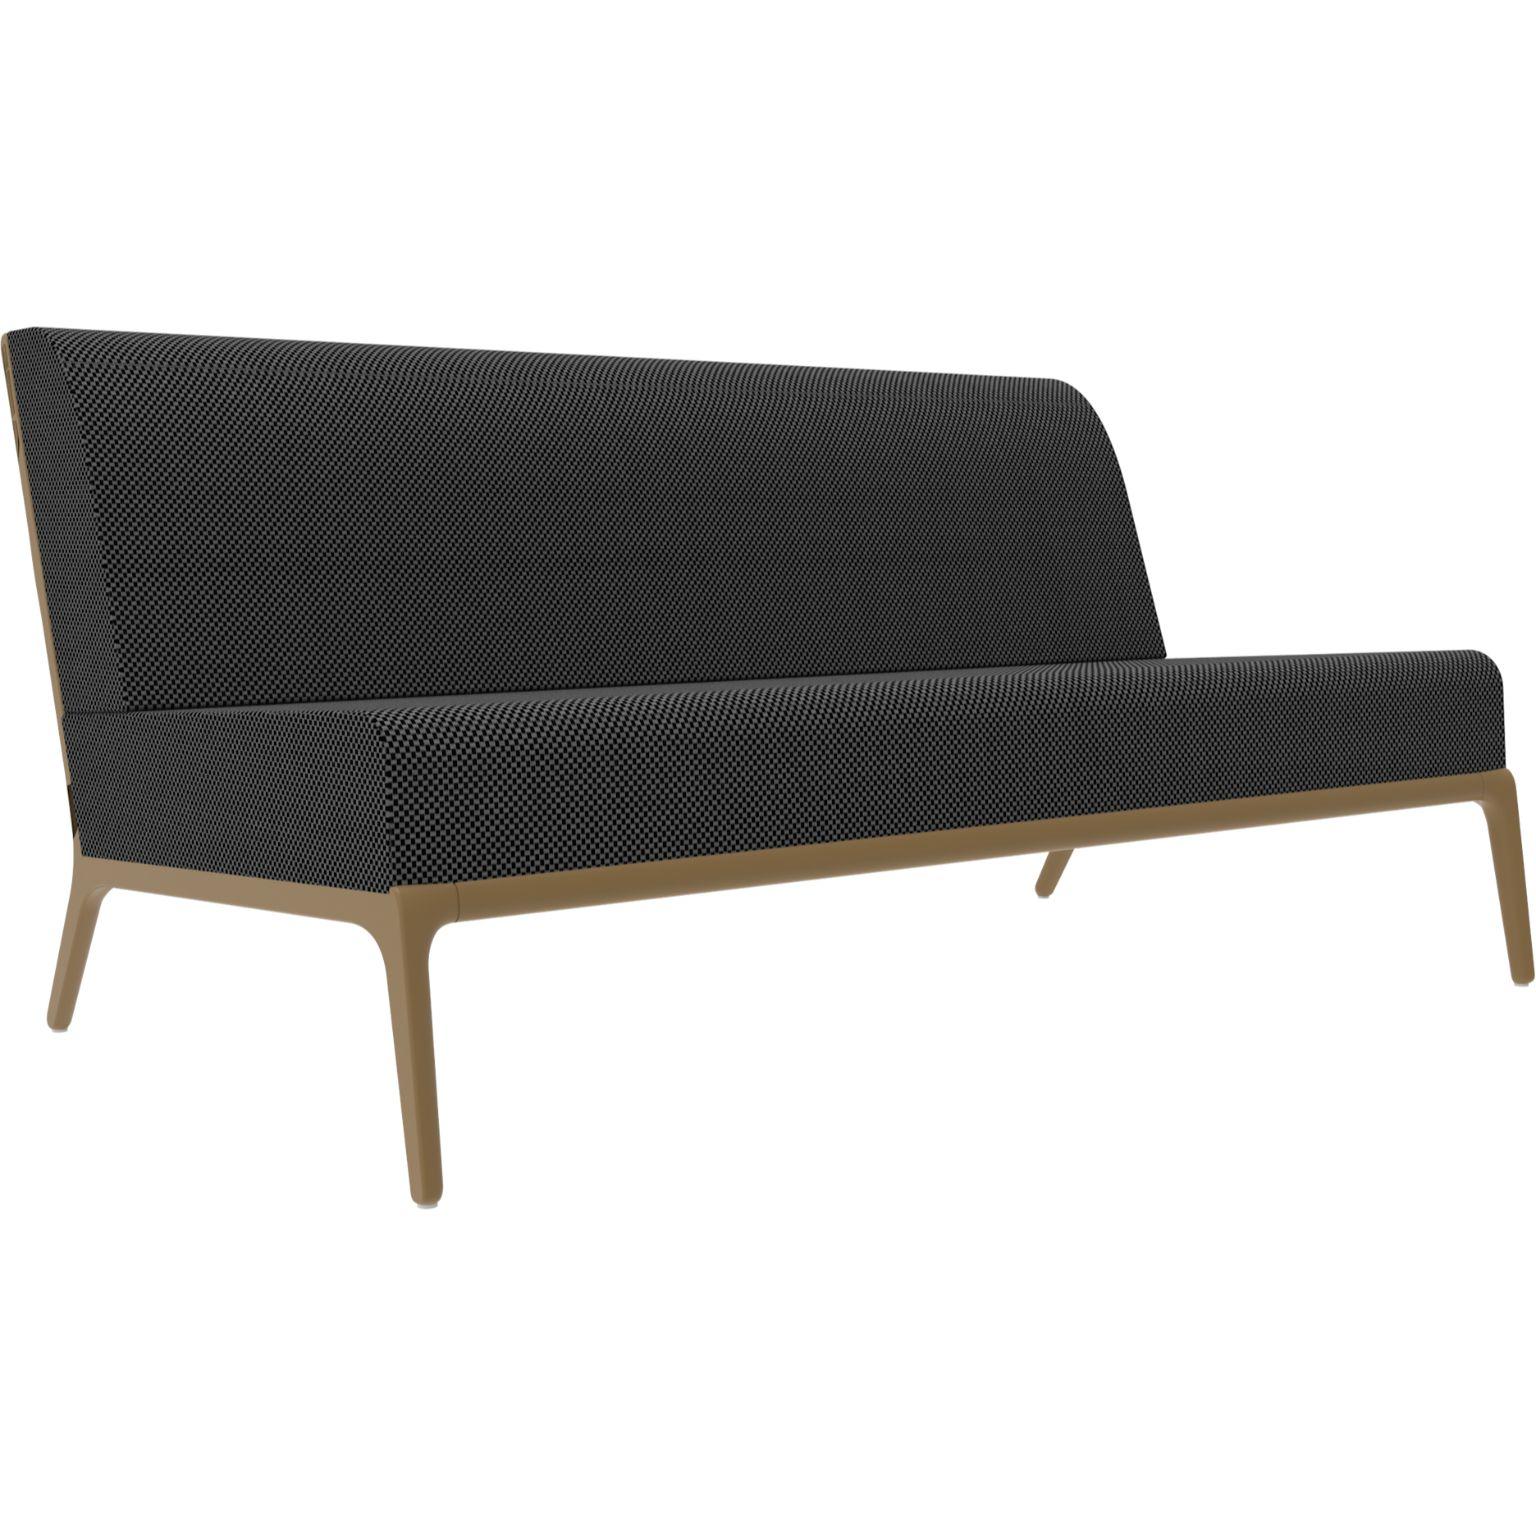 Xaloc Central 160 Gold Modular sofa by MOWEE
Dimensions: D100 x W160 x H81 cm (Seat Height 42cm)
Material: Aluminium, Textile
Weight: 35.5 kg
Also Available in different colors and finishes.

 Xaloc synthesizes the lines of interior furniture